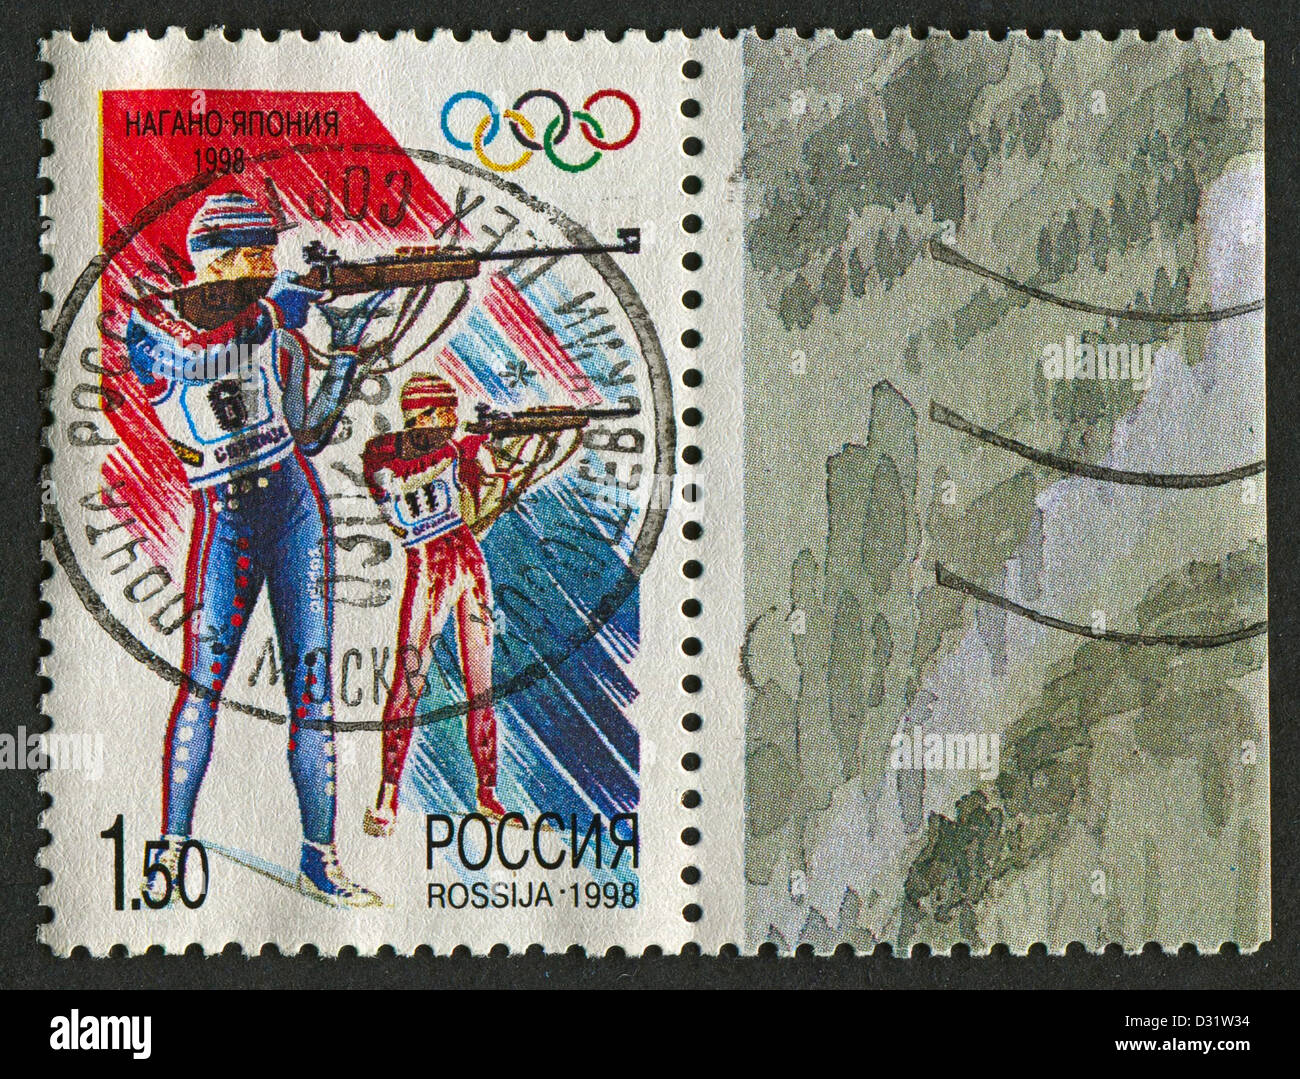 RUSSIA - CIRCA 1998: Postage stamps printed in Russia dedicated to XVIII Winter Olympic Games (1998) in Nagano, Japan, circa 1998. Stock Photo